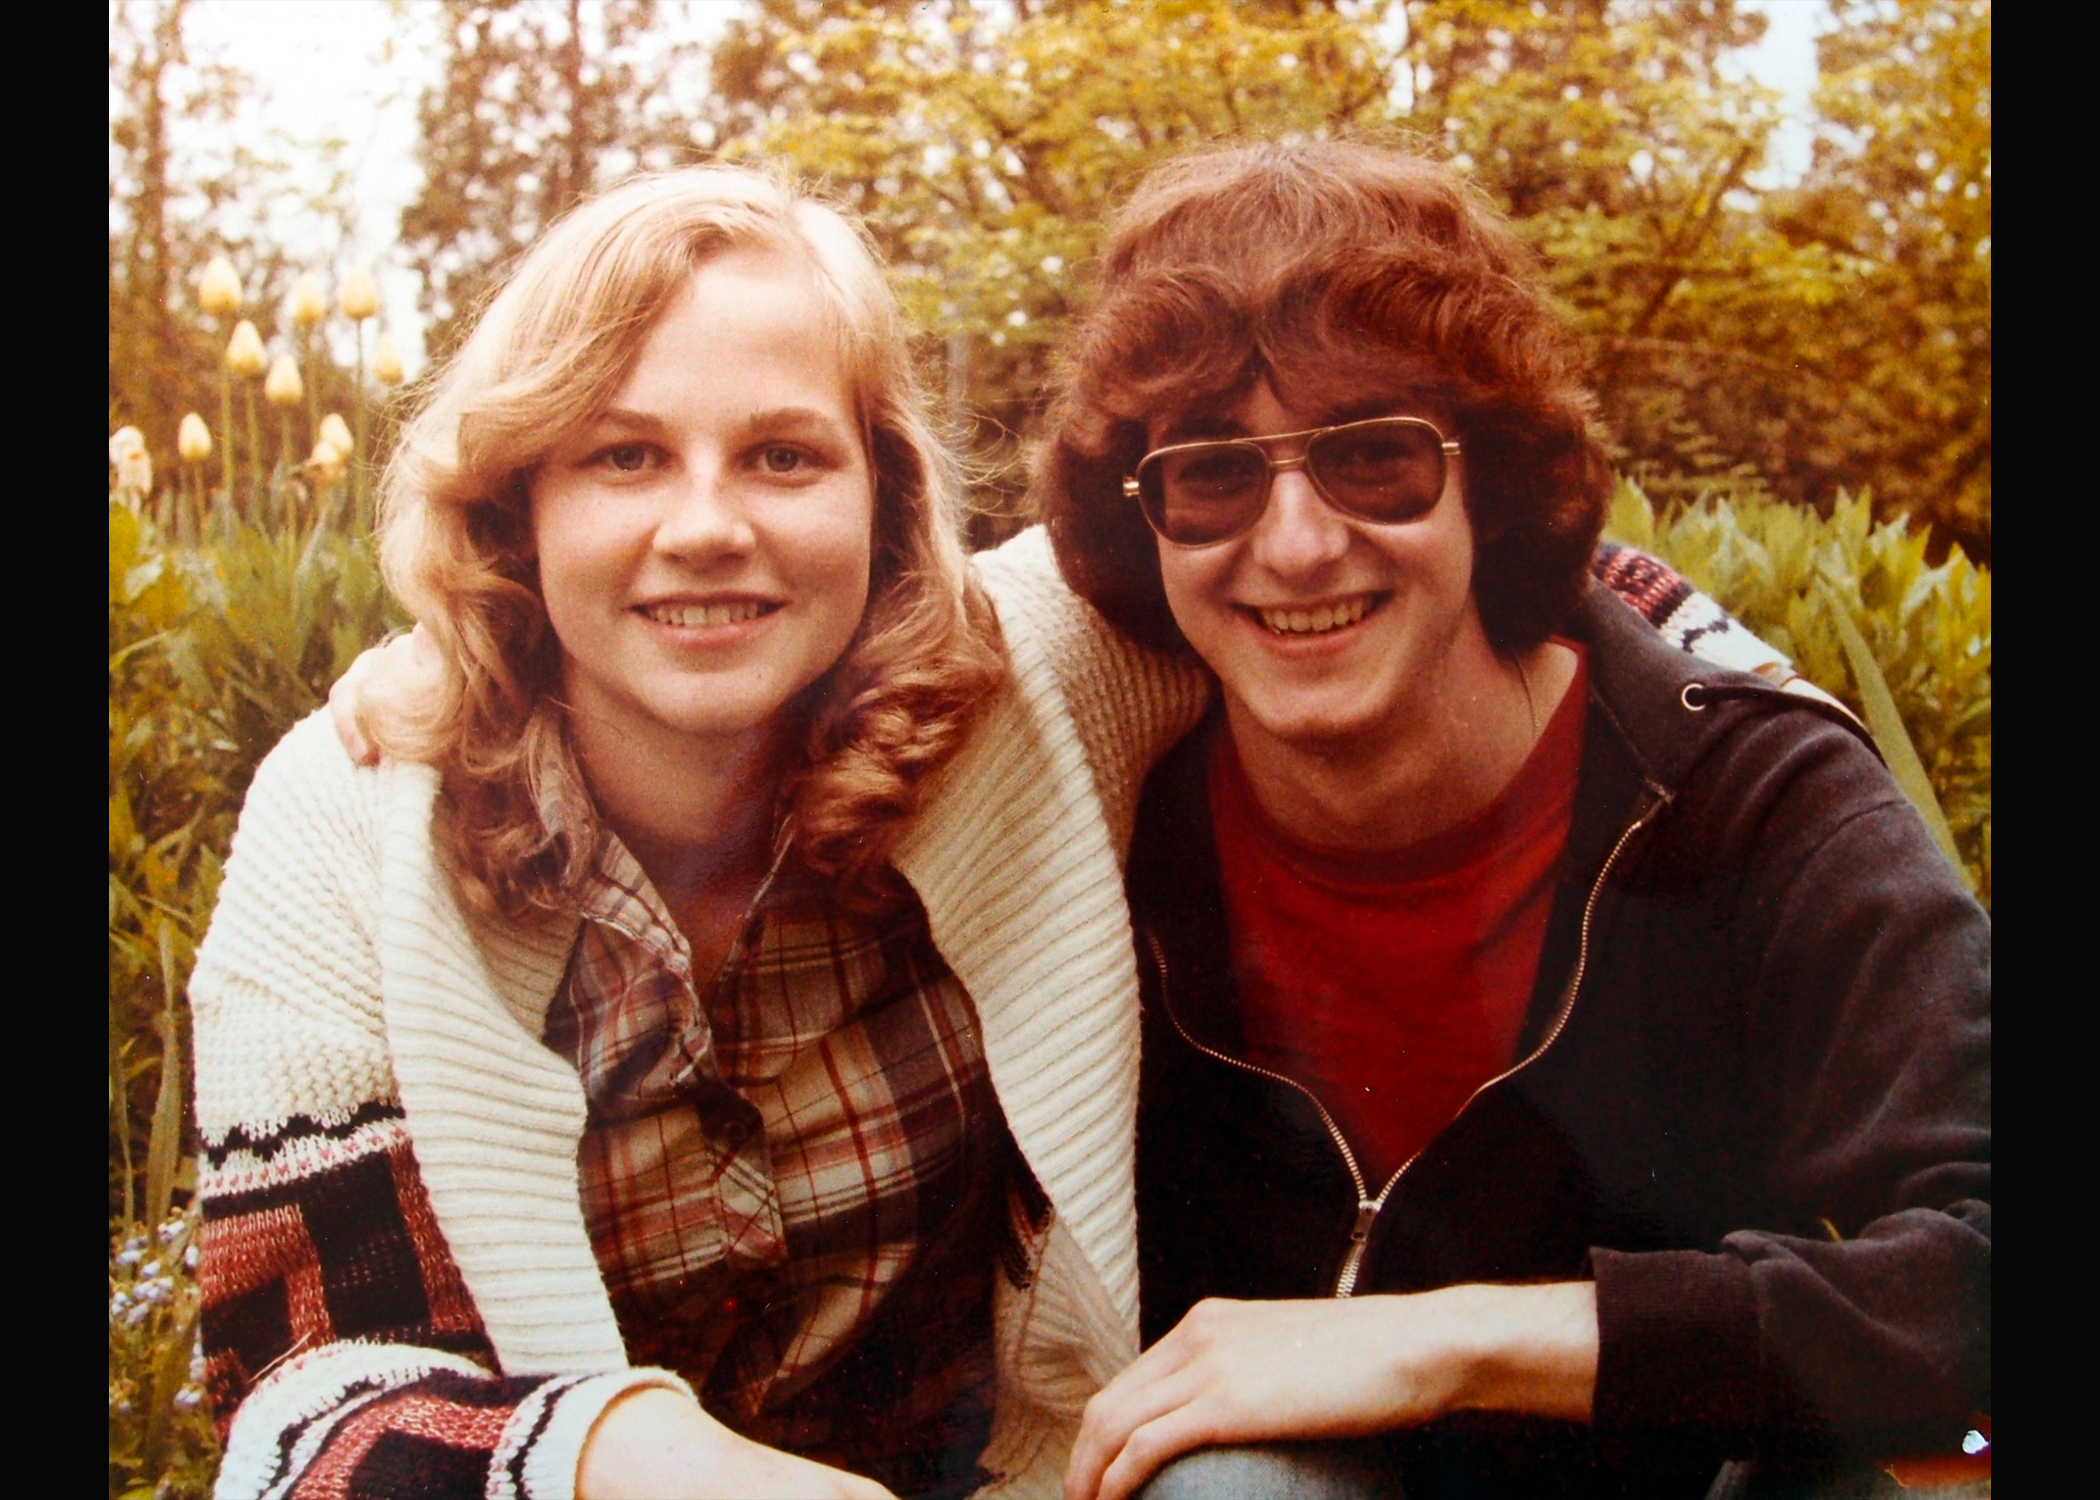 Pat (l) and Dennis (r) Faherty after meeting at University of Wisconsin- Milwaukee, around 1979. (Courtesy of Pat Faherty)